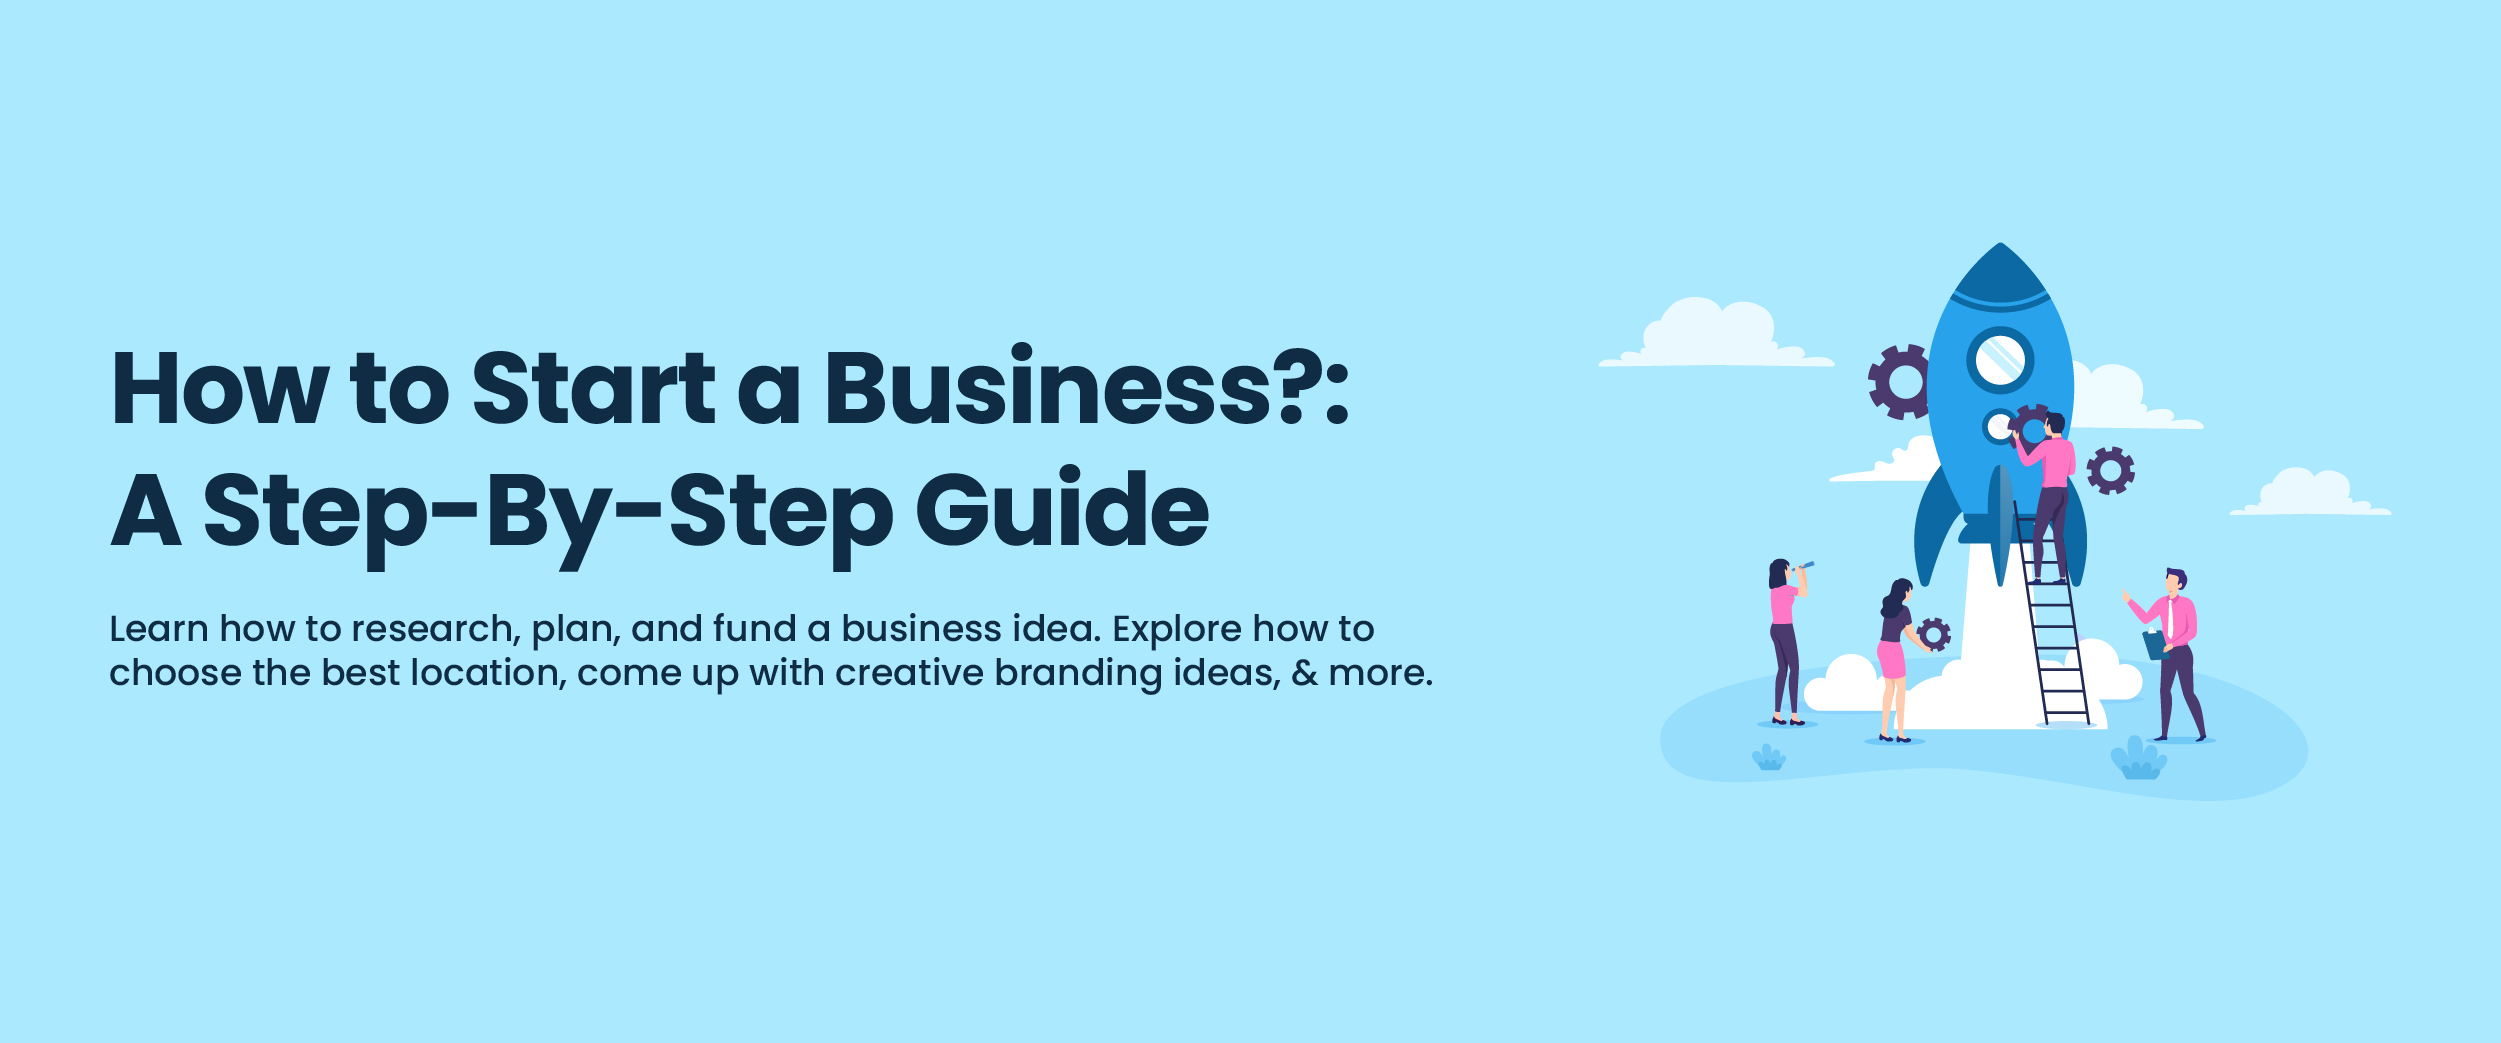 How to Start a Business a Step By Step Guide